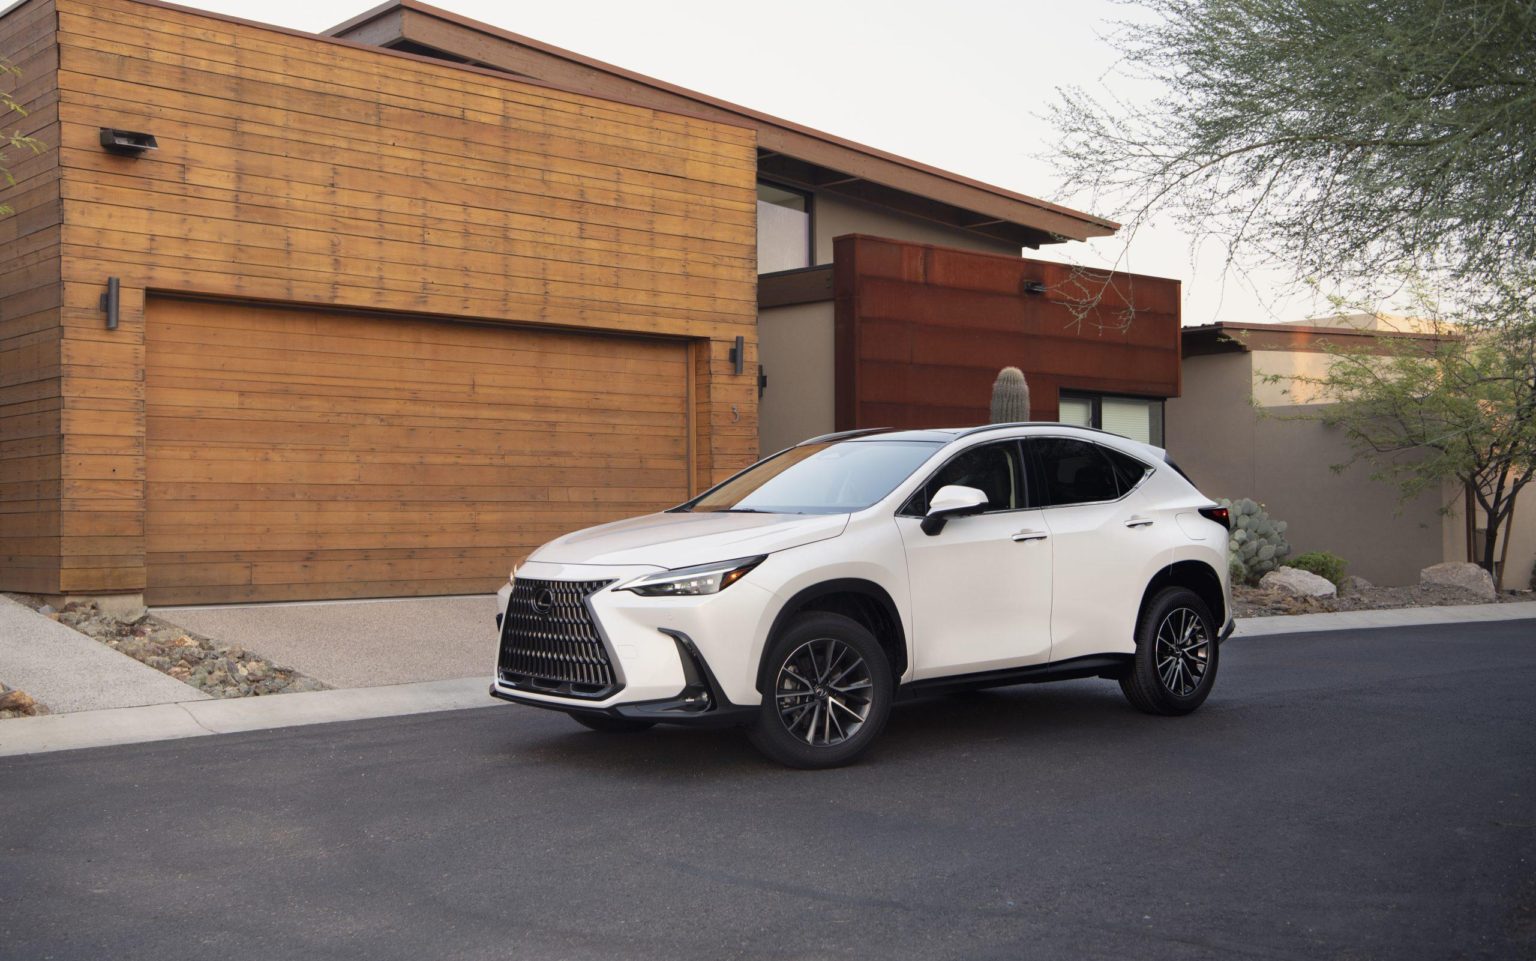 The 2022 NX earned a Top Safety Pick + award.